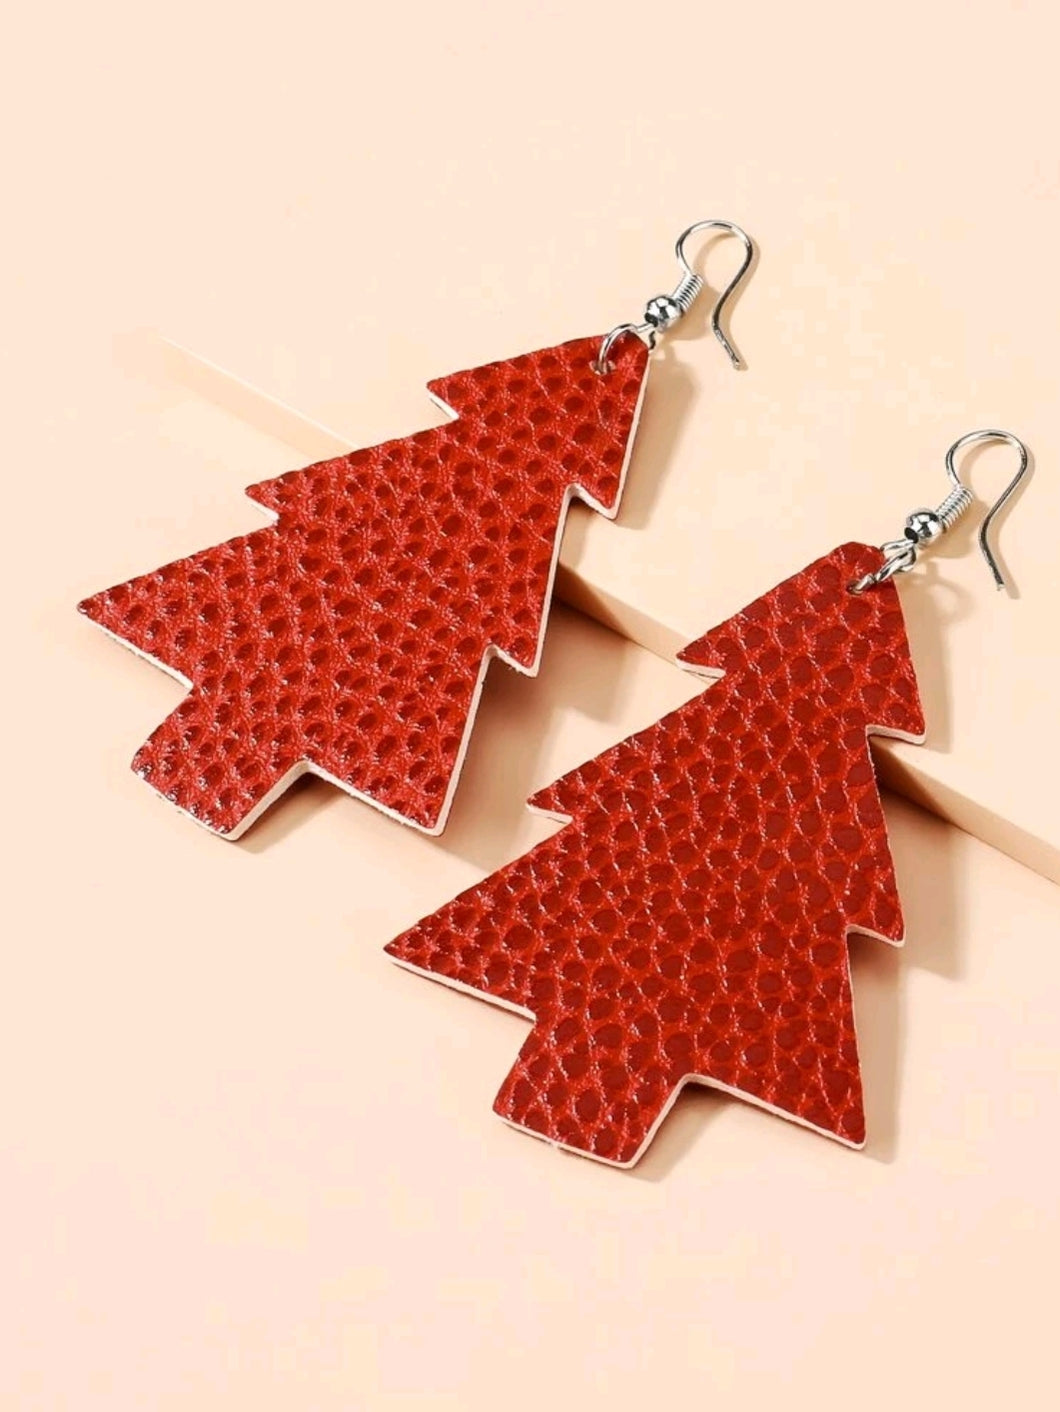 1 Pair Christmas Red Tree Charm Drop Earrings Unisex Suitable for festive occasion that you want to be charming and special: these Christmas dangle earrings accessories are suitable for wearing to attend theme parties, Christmas parties or match your daily wearing, will make you stand out of the crowd! Low weight: won't let you feel discomfort, you can wear them for long time and just enjoy your party time! Lovely gift idea :) Material: PU Leather Colour: Red Type: Dangle Style: Glam Casual